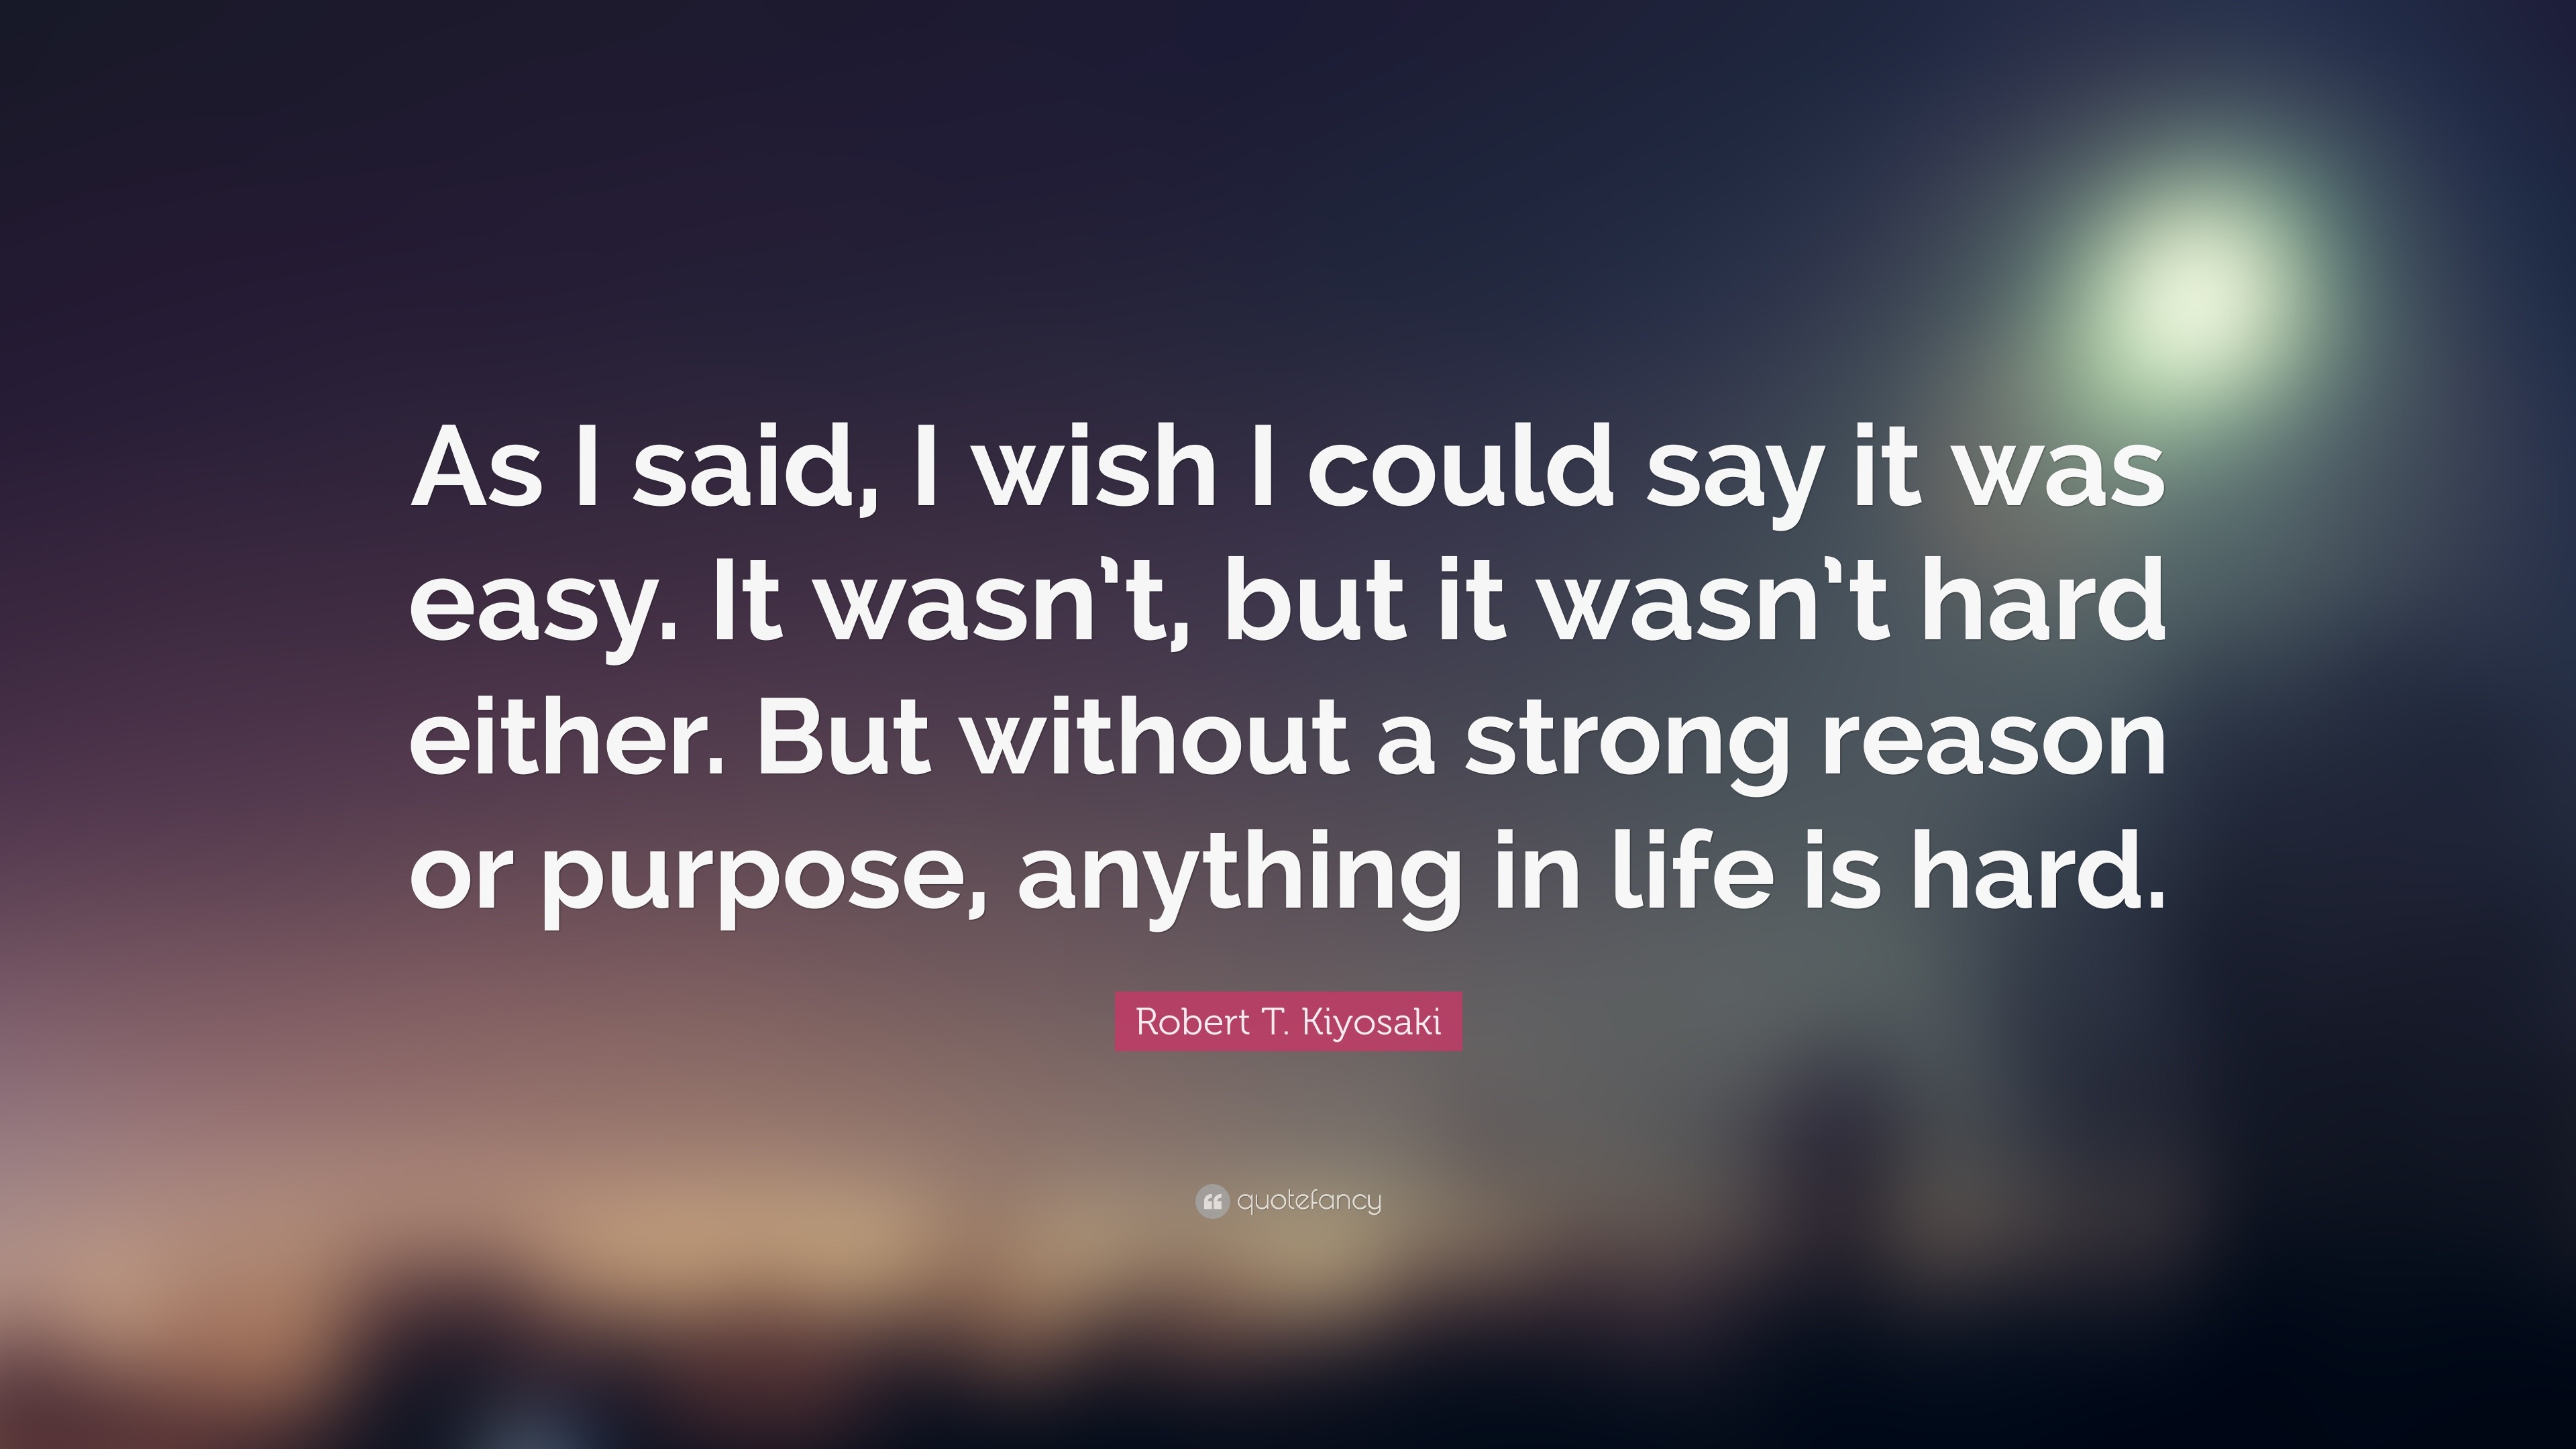 Robert T. Kiyosaki Quote: “As I Said, I Wish I Could Say It Was Easy. It Wasn't, But It Wasn't Hard Either. But Without A Strong Reason Or Purpose,...”